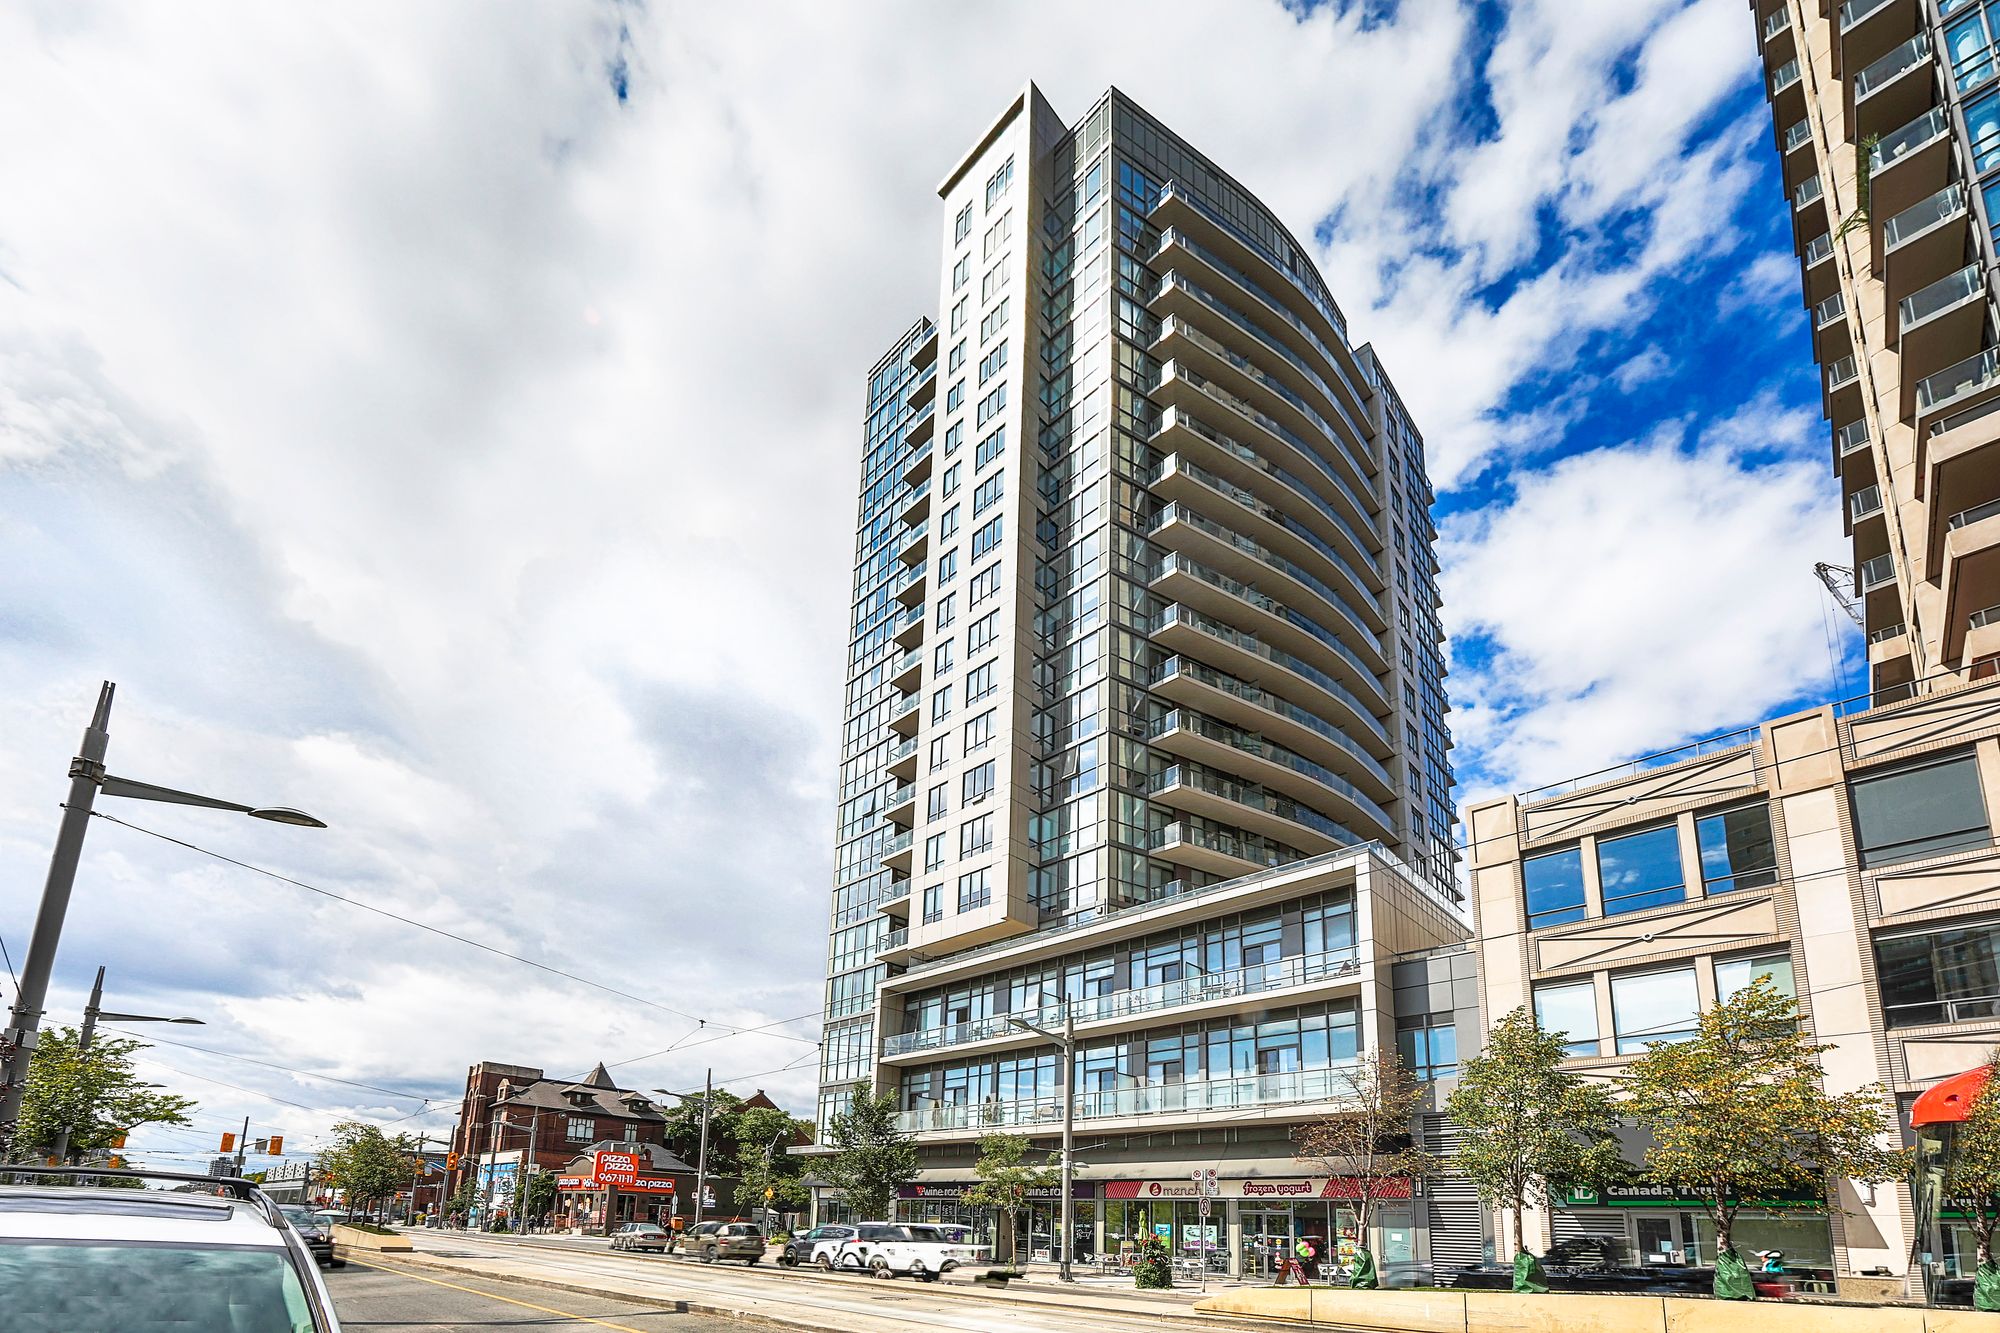 530 St Clair Ave W . This condo at 530 St Clair West is located in  Midtown, Toronto - image #1 of 5 by Strata.ca